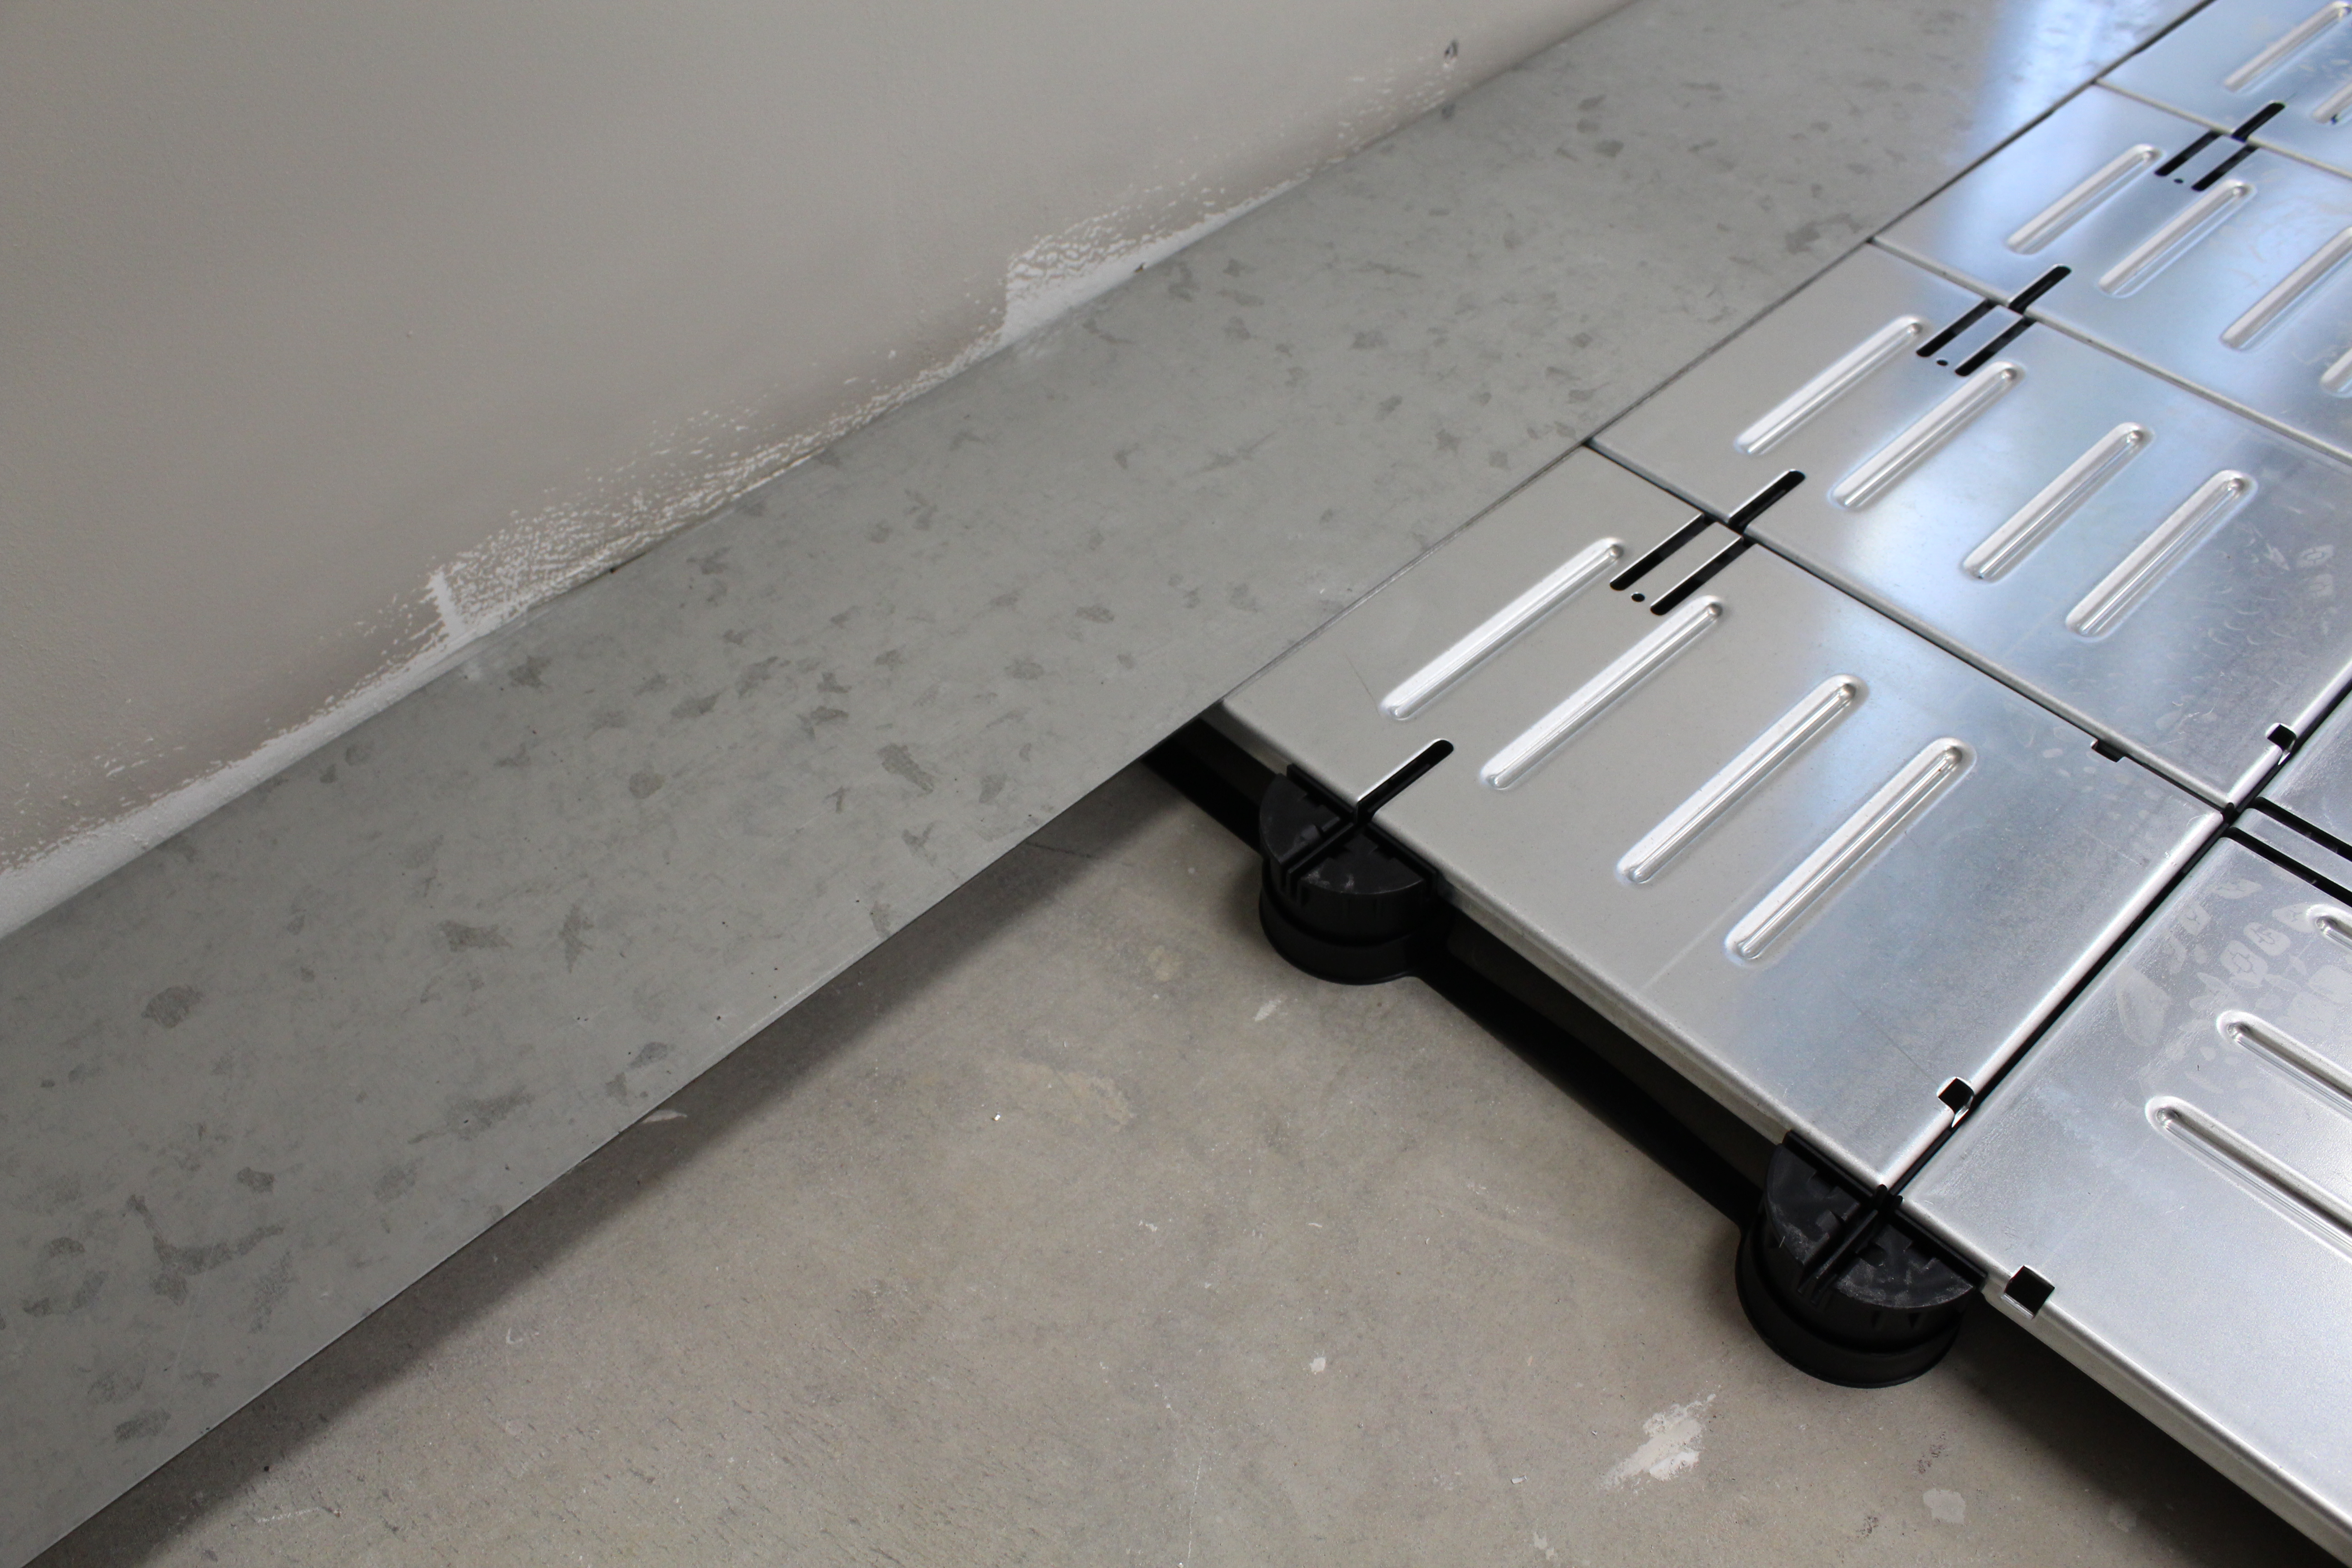 Perimeter plate specifically designed for low profile access flooring